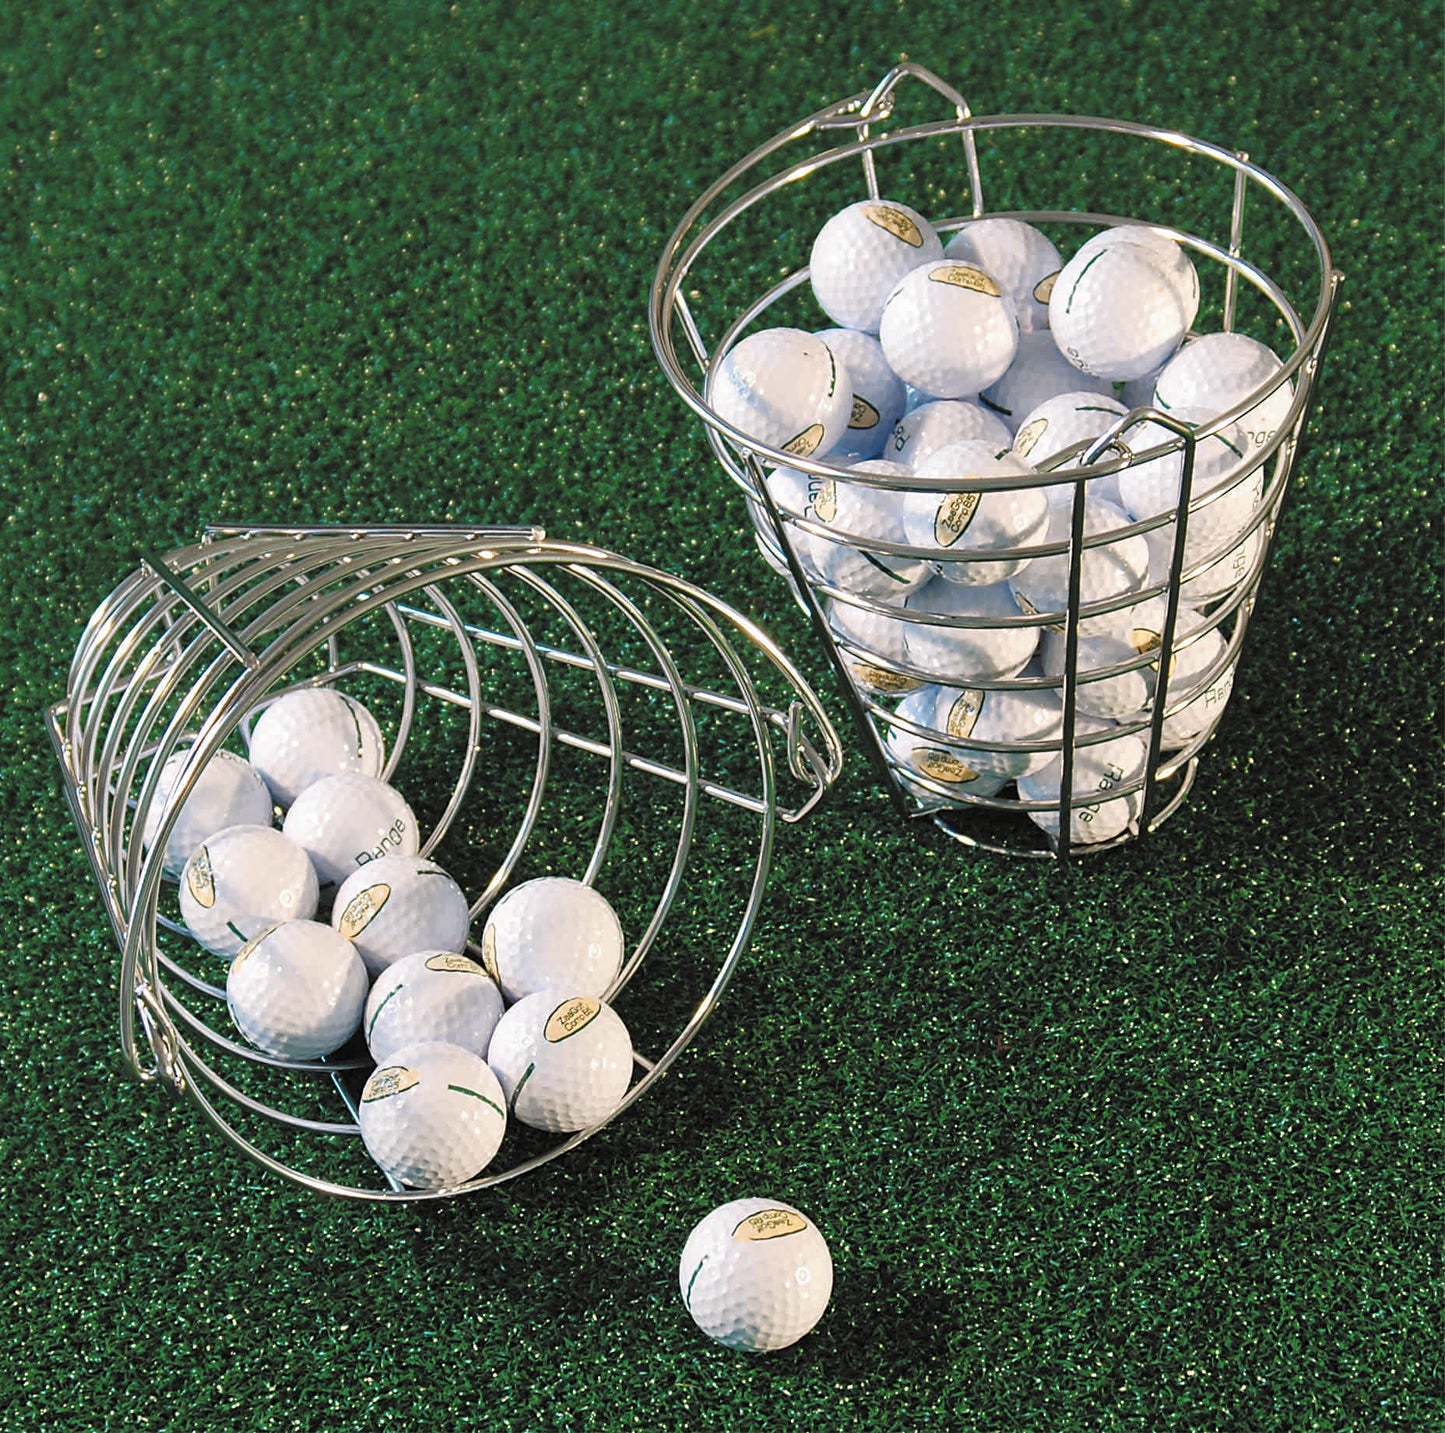 Conical Ball Basket for 50 balls